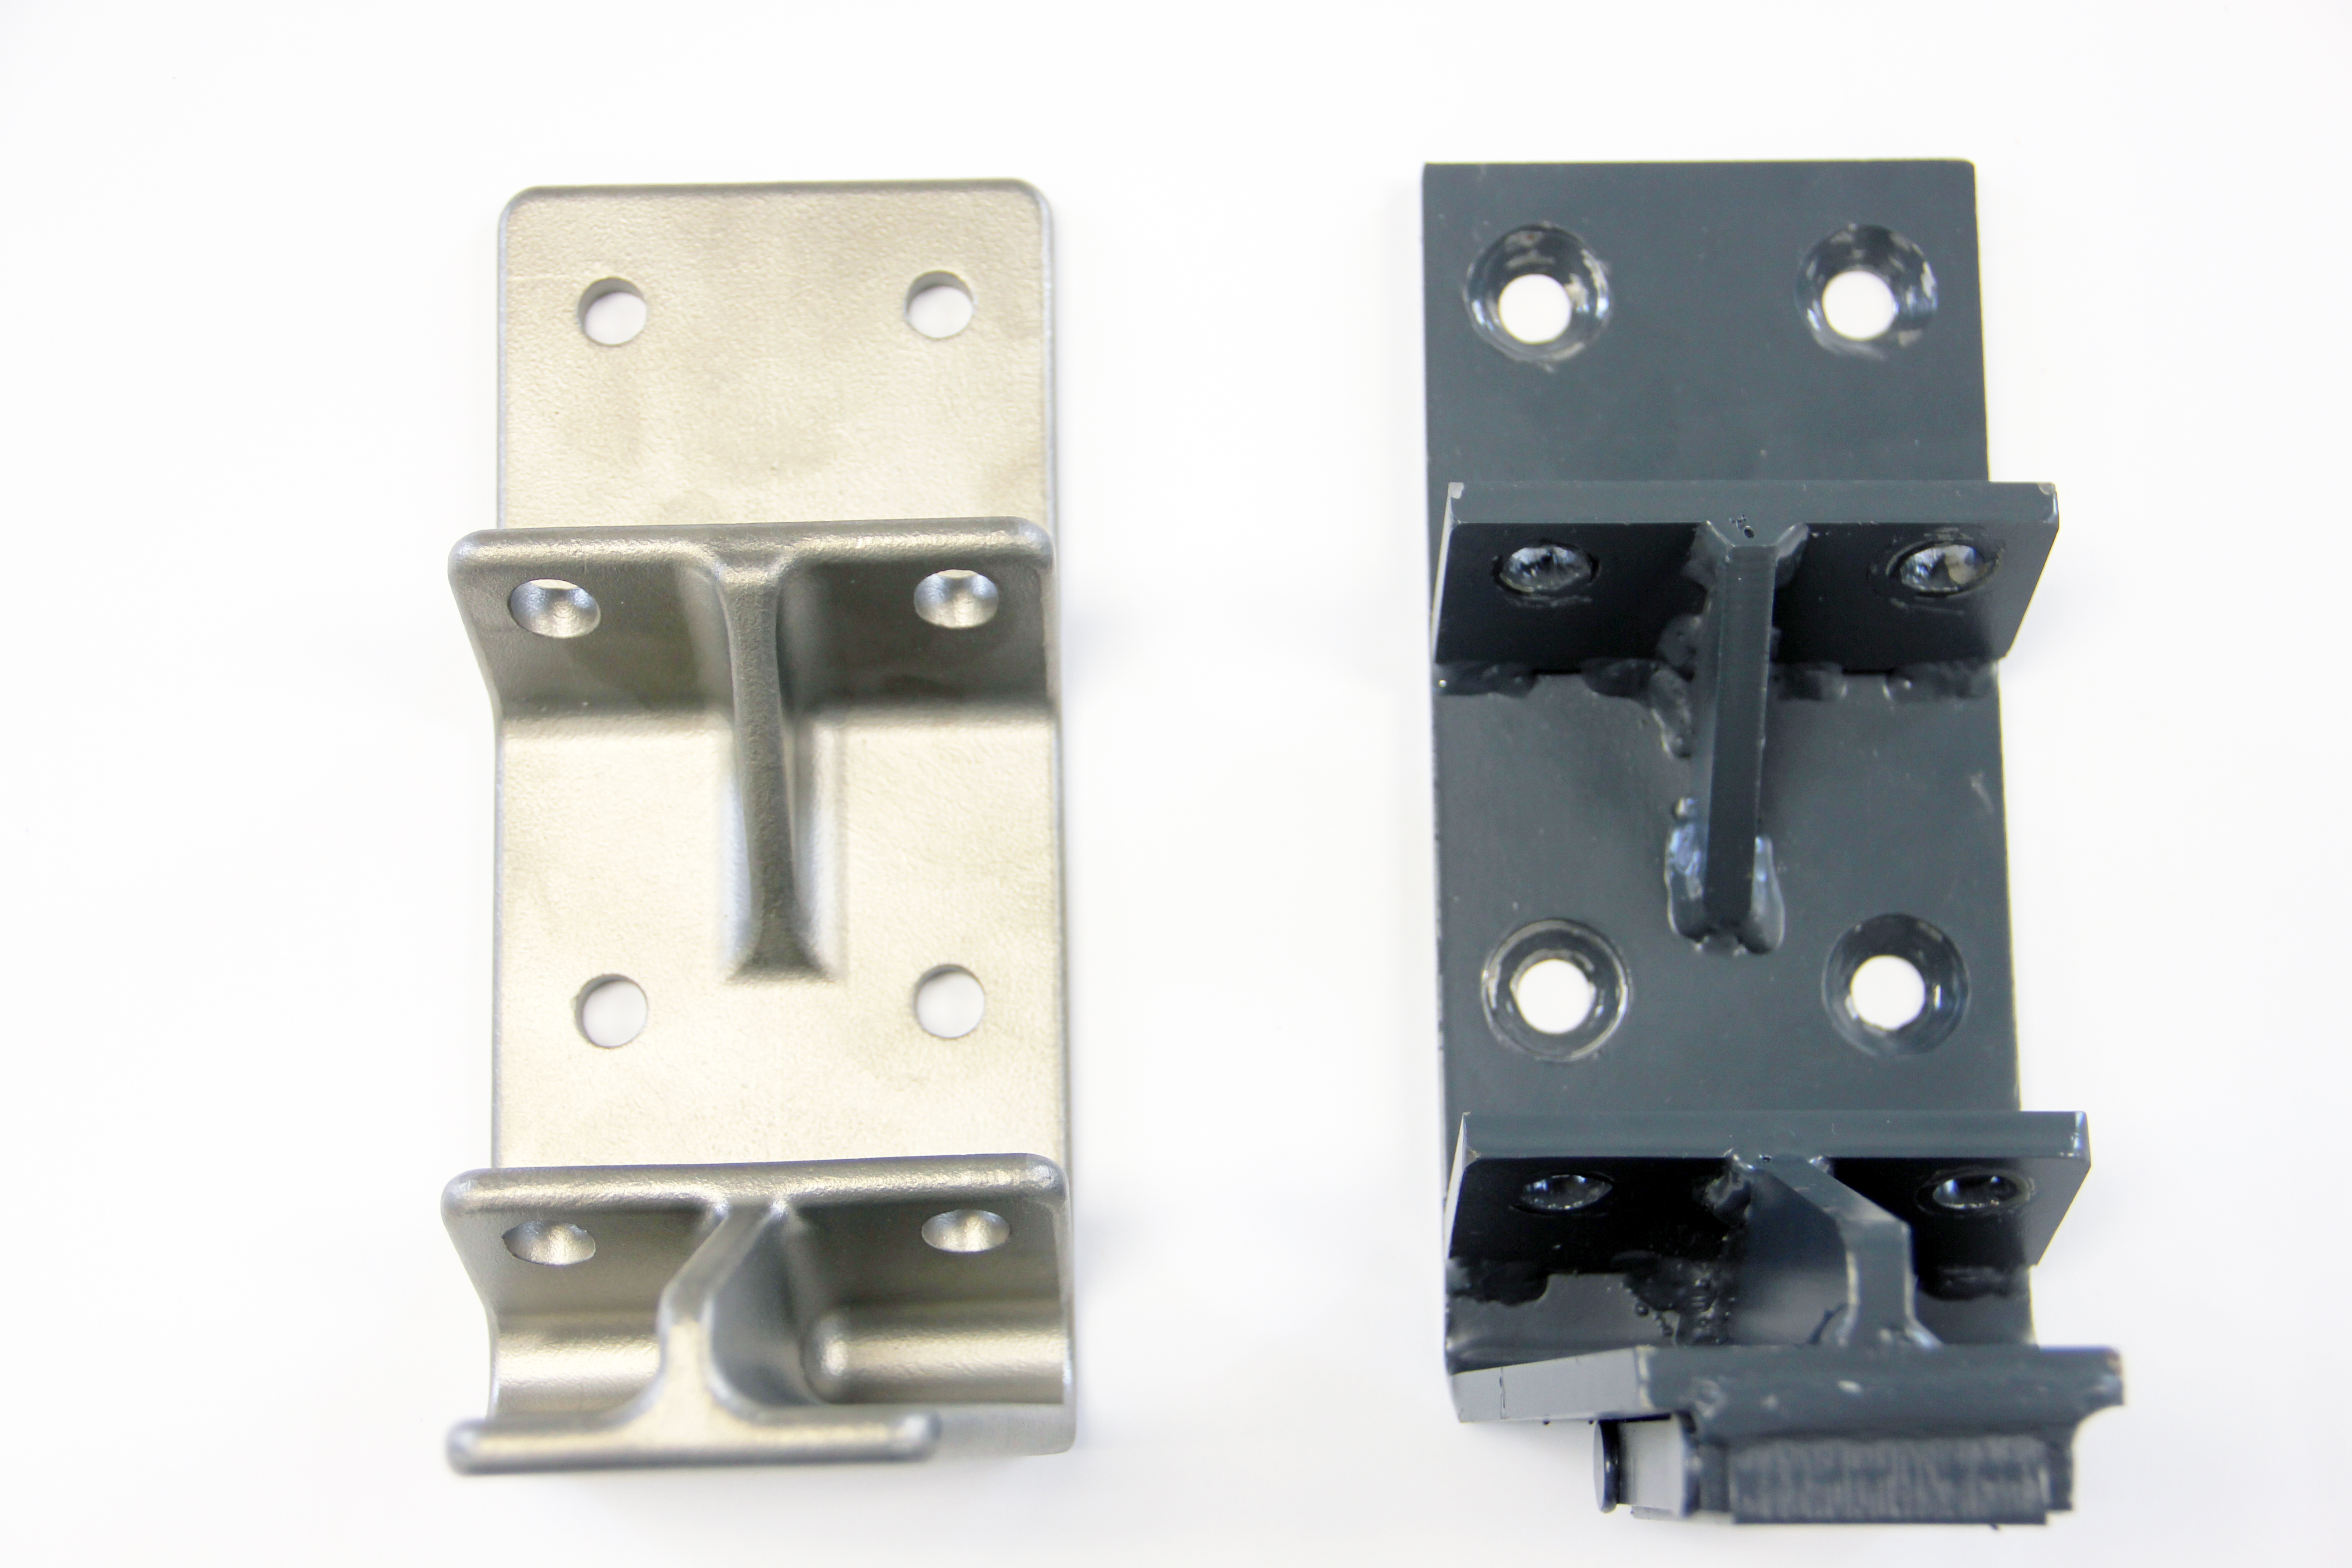 Trough Mounting Bracket - Investment casting vs. Welding